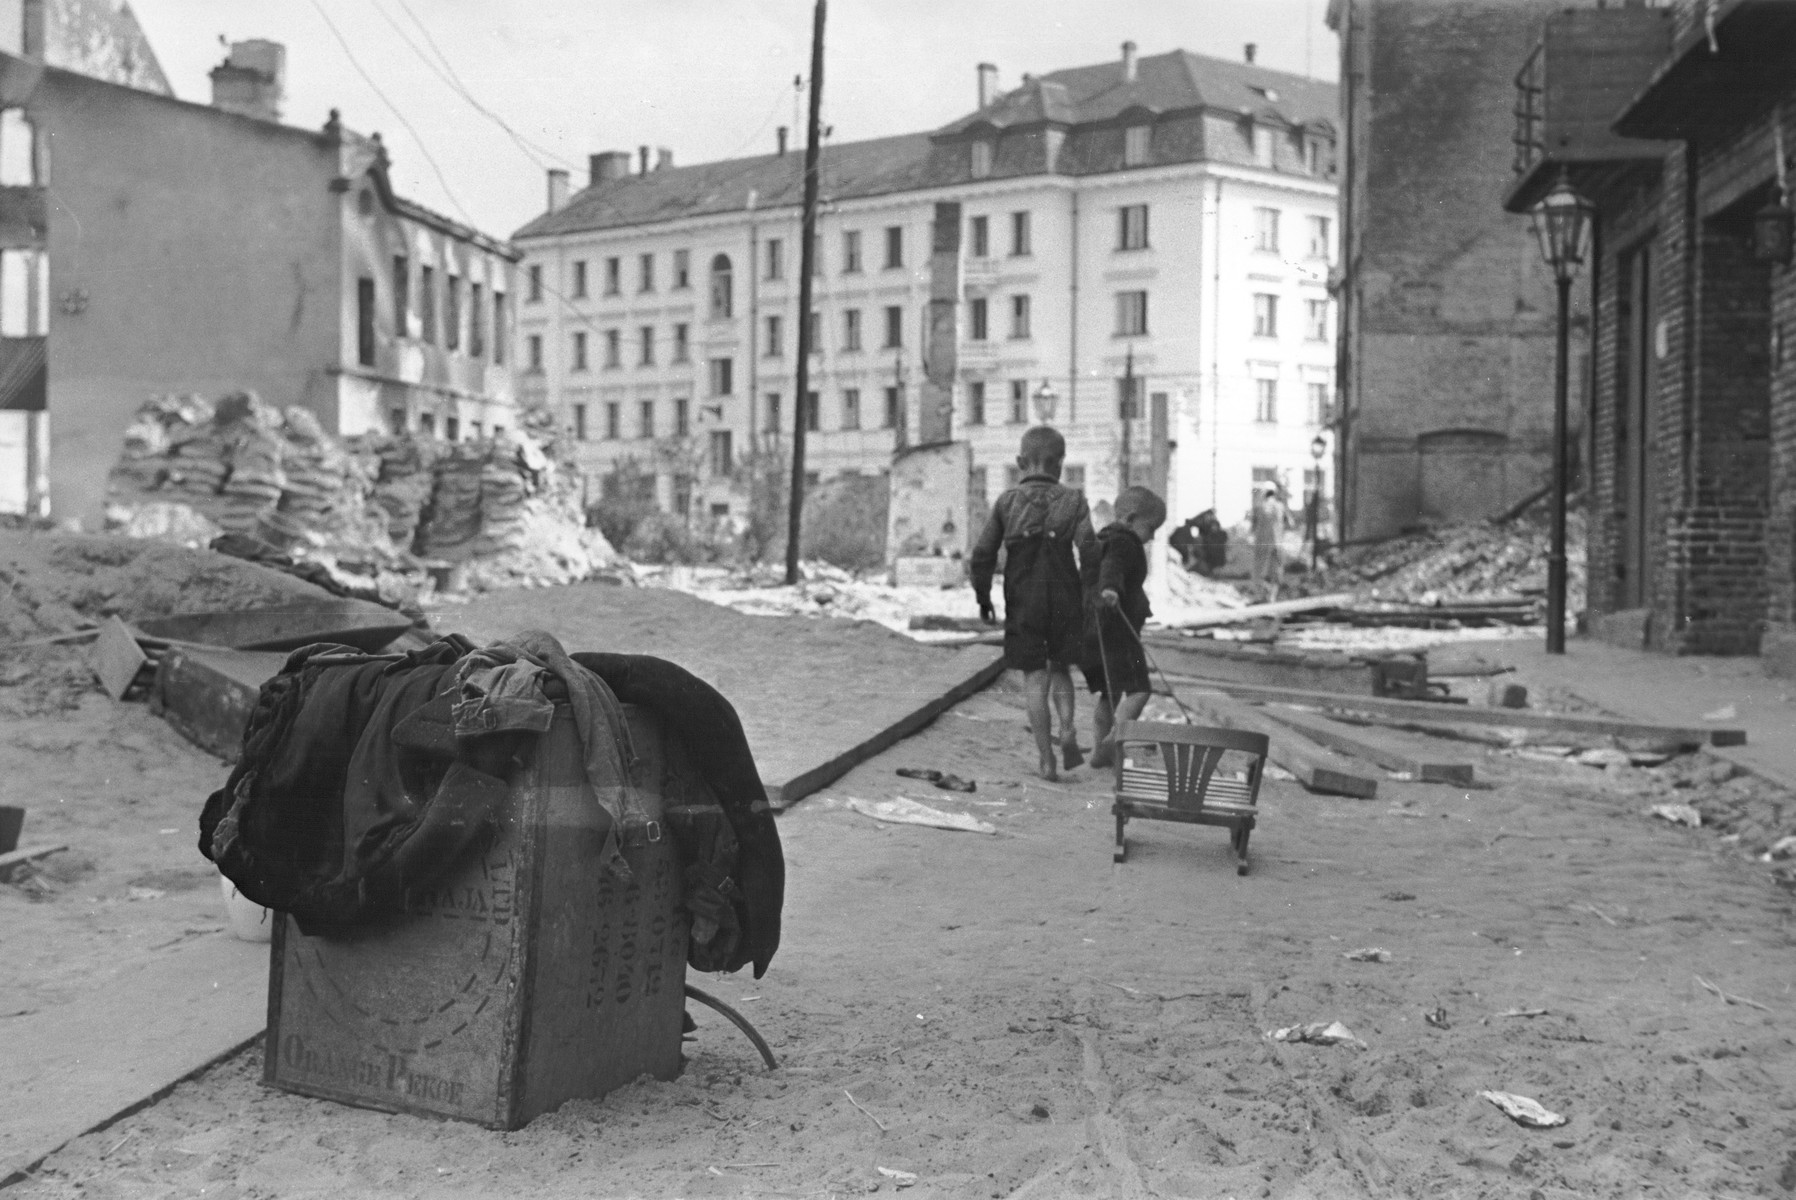 Two young Polish children pull a toy chair along a street in Warsaw that is strewn with rubble as a result of German air raids.

In the foreground is an abandoned crate stamped with the words "Orange Pekoe."